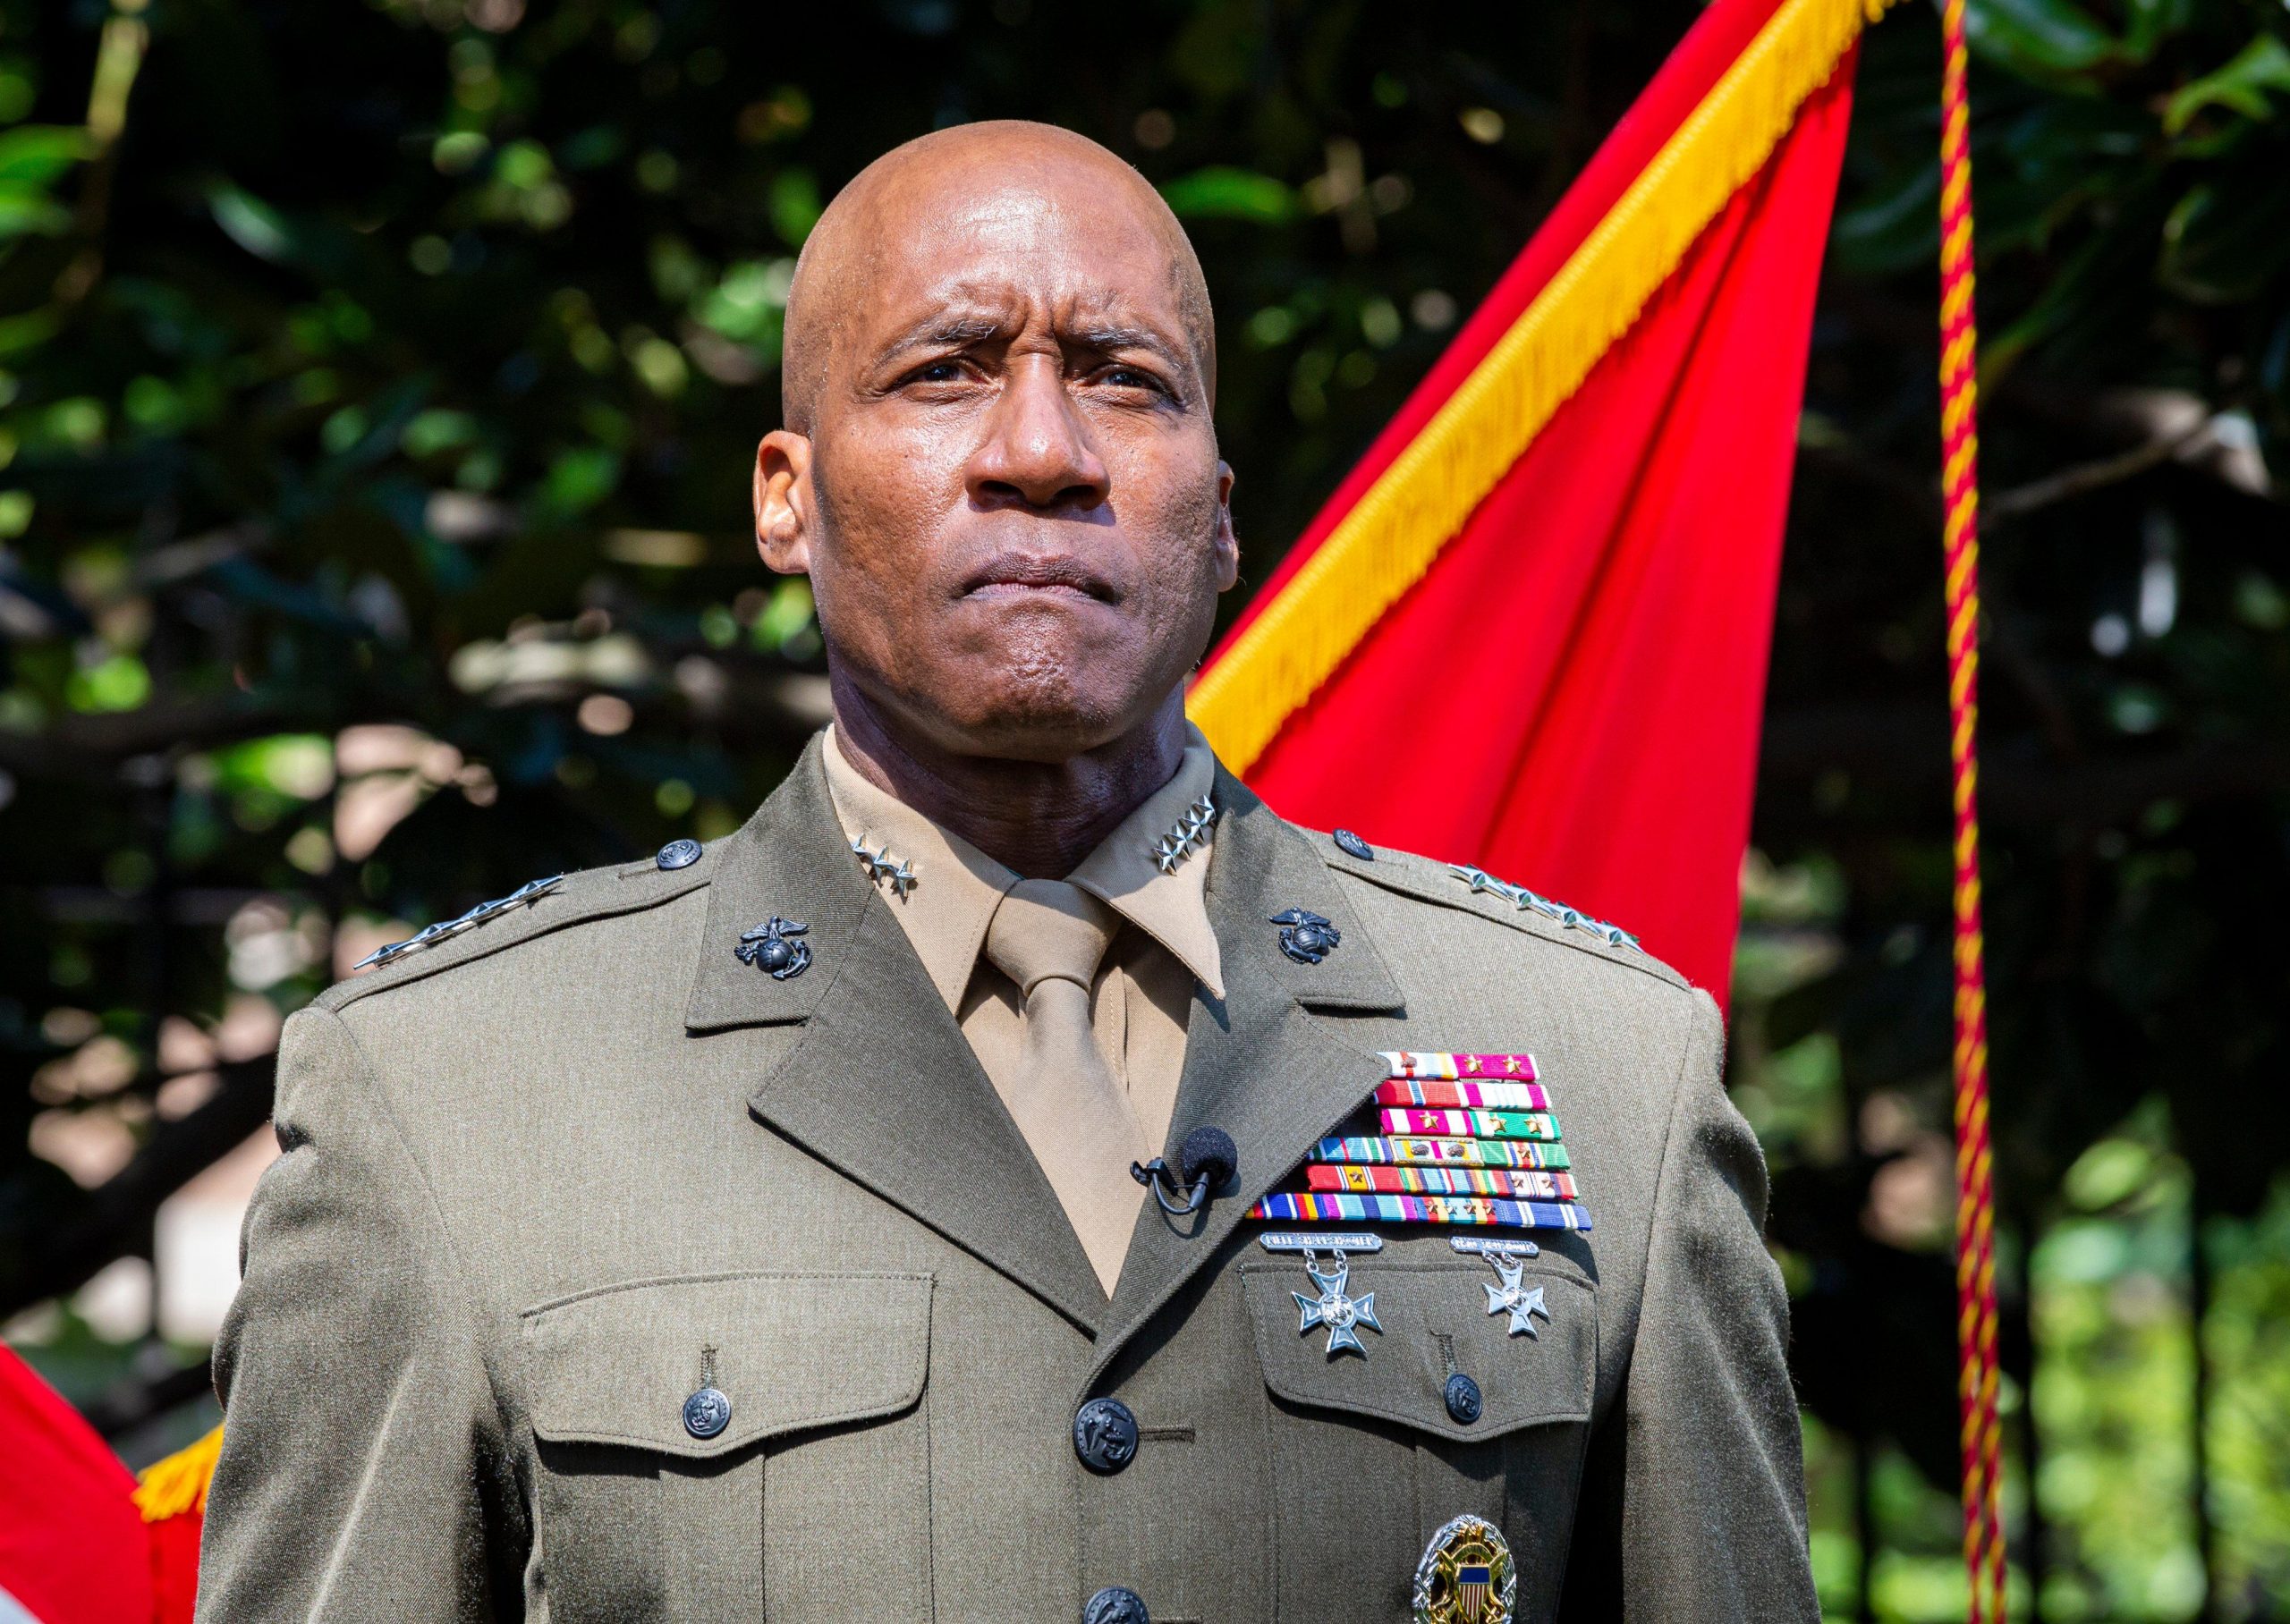 Michael E Langley sworn in as the first Black 4-star US Marine general